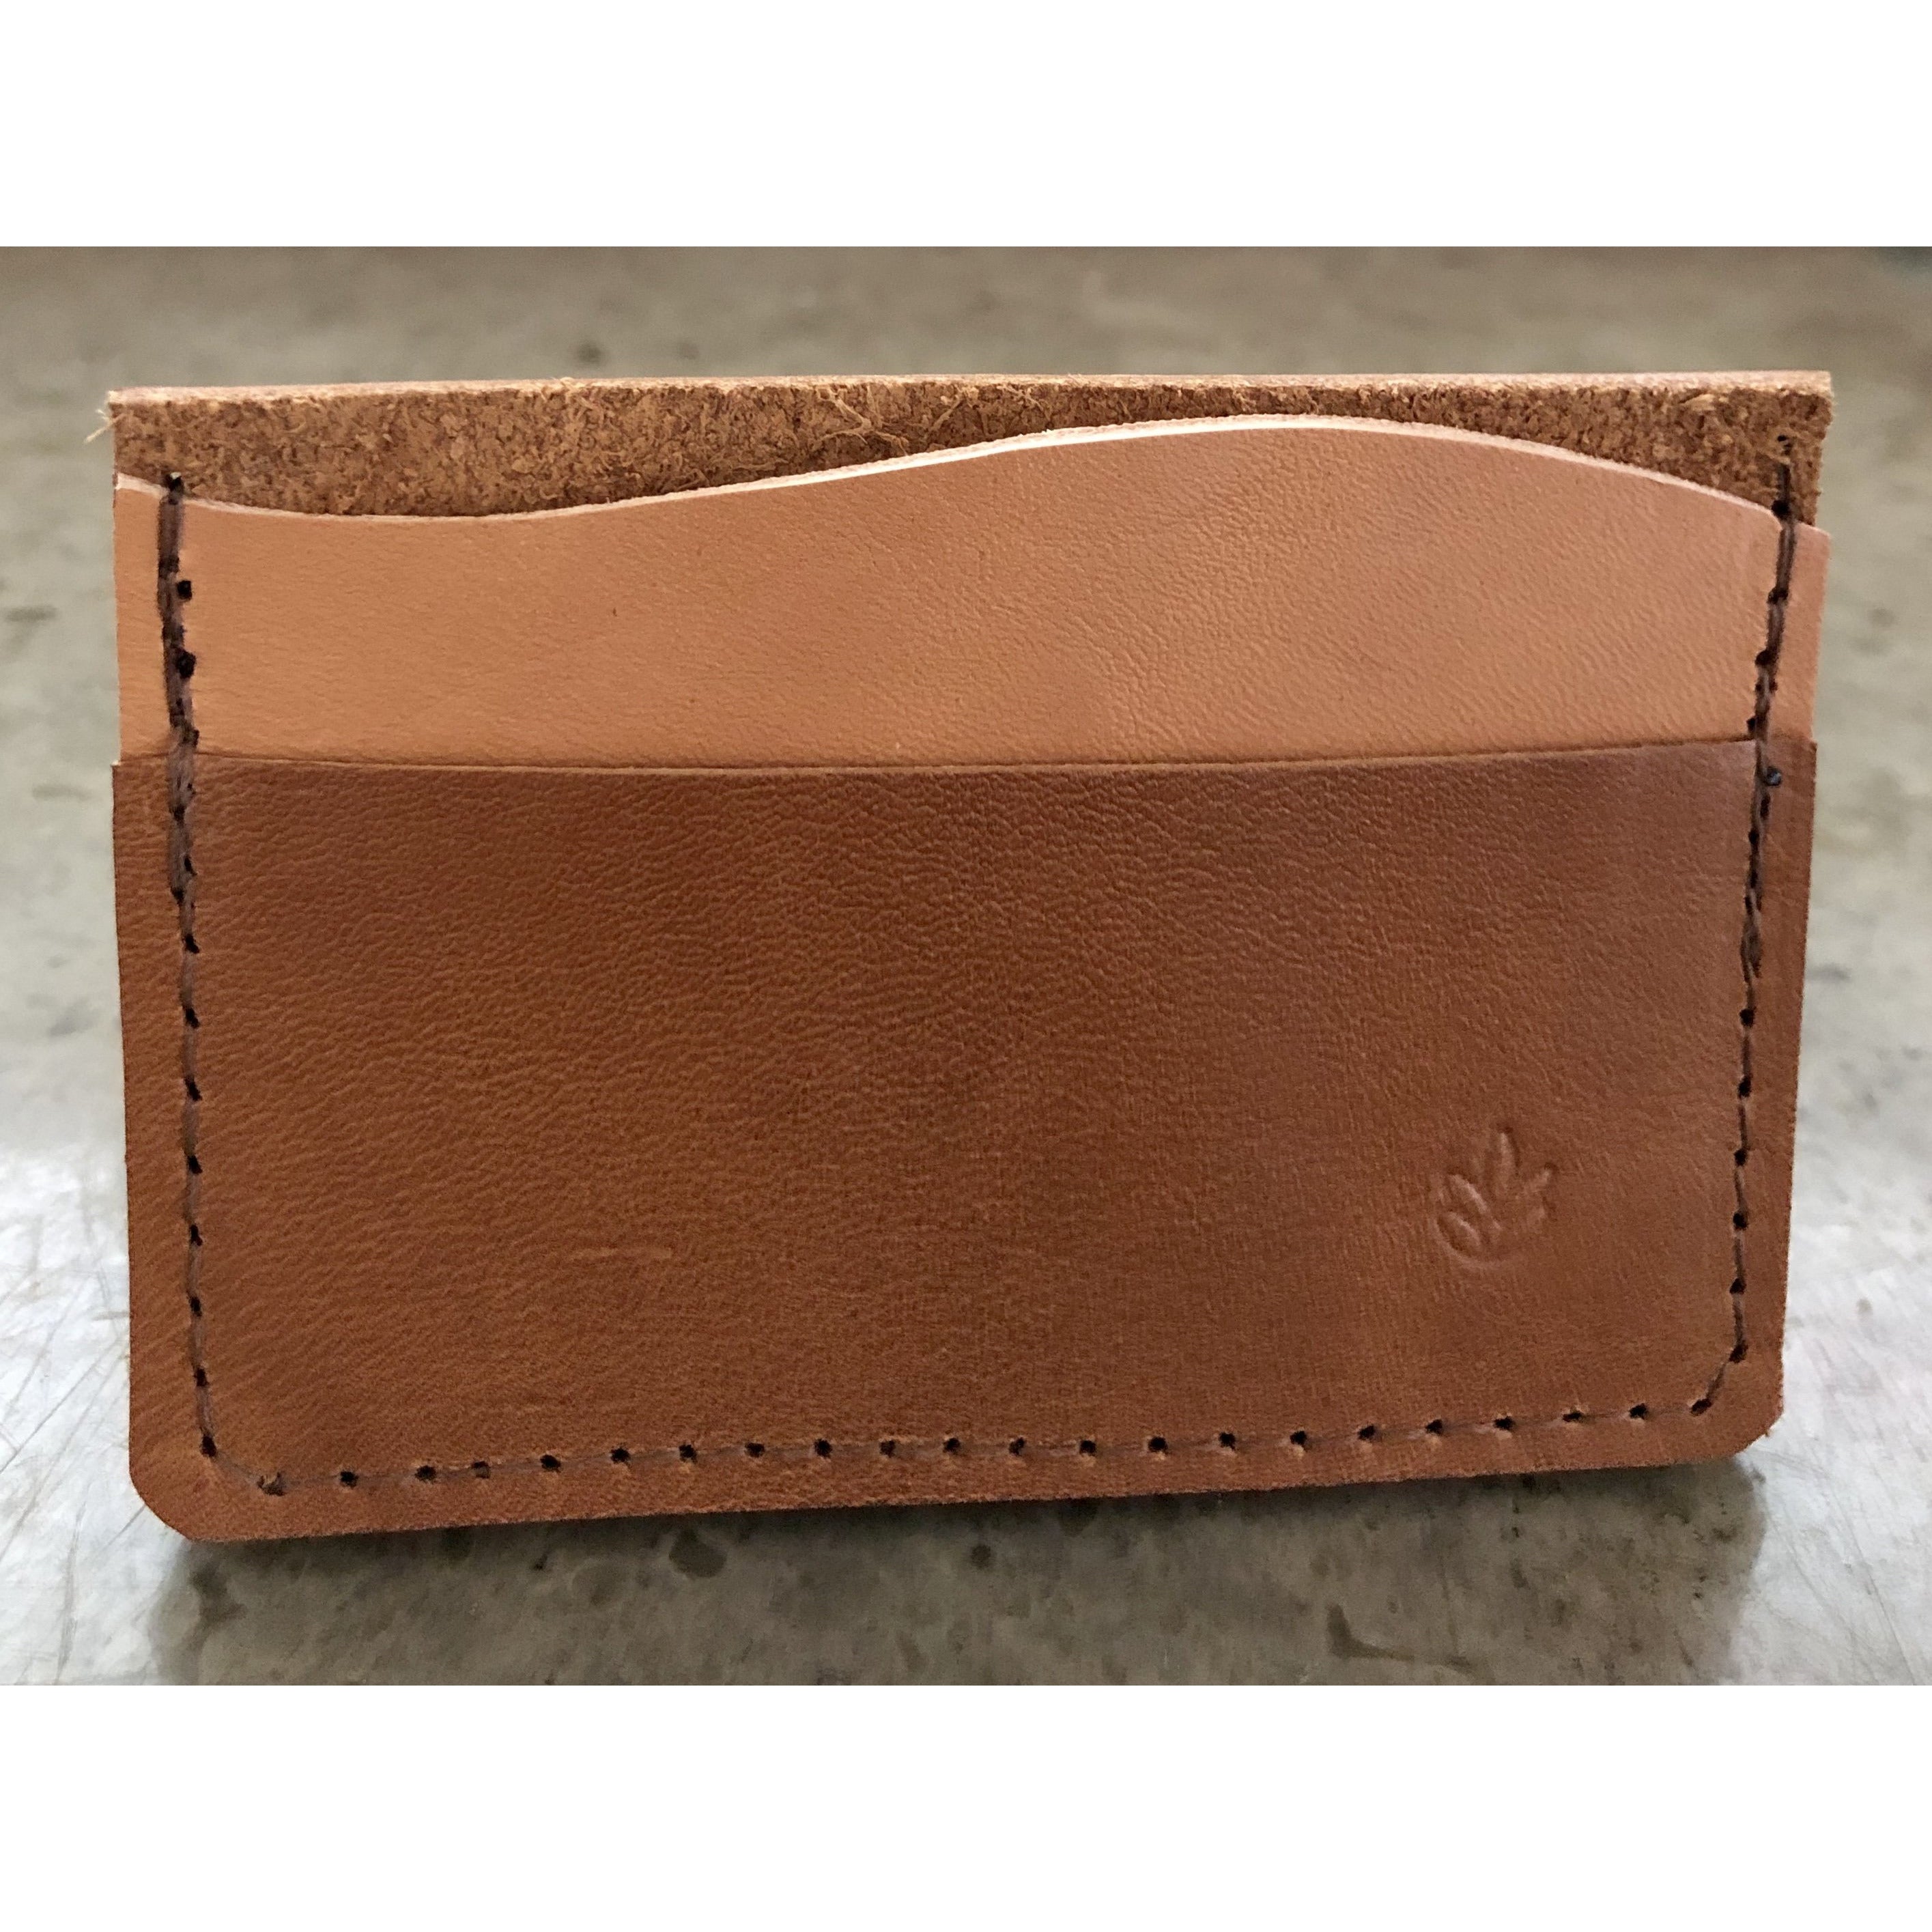 Minimalist 3 Pocket Leather Wallet in brown and light tan